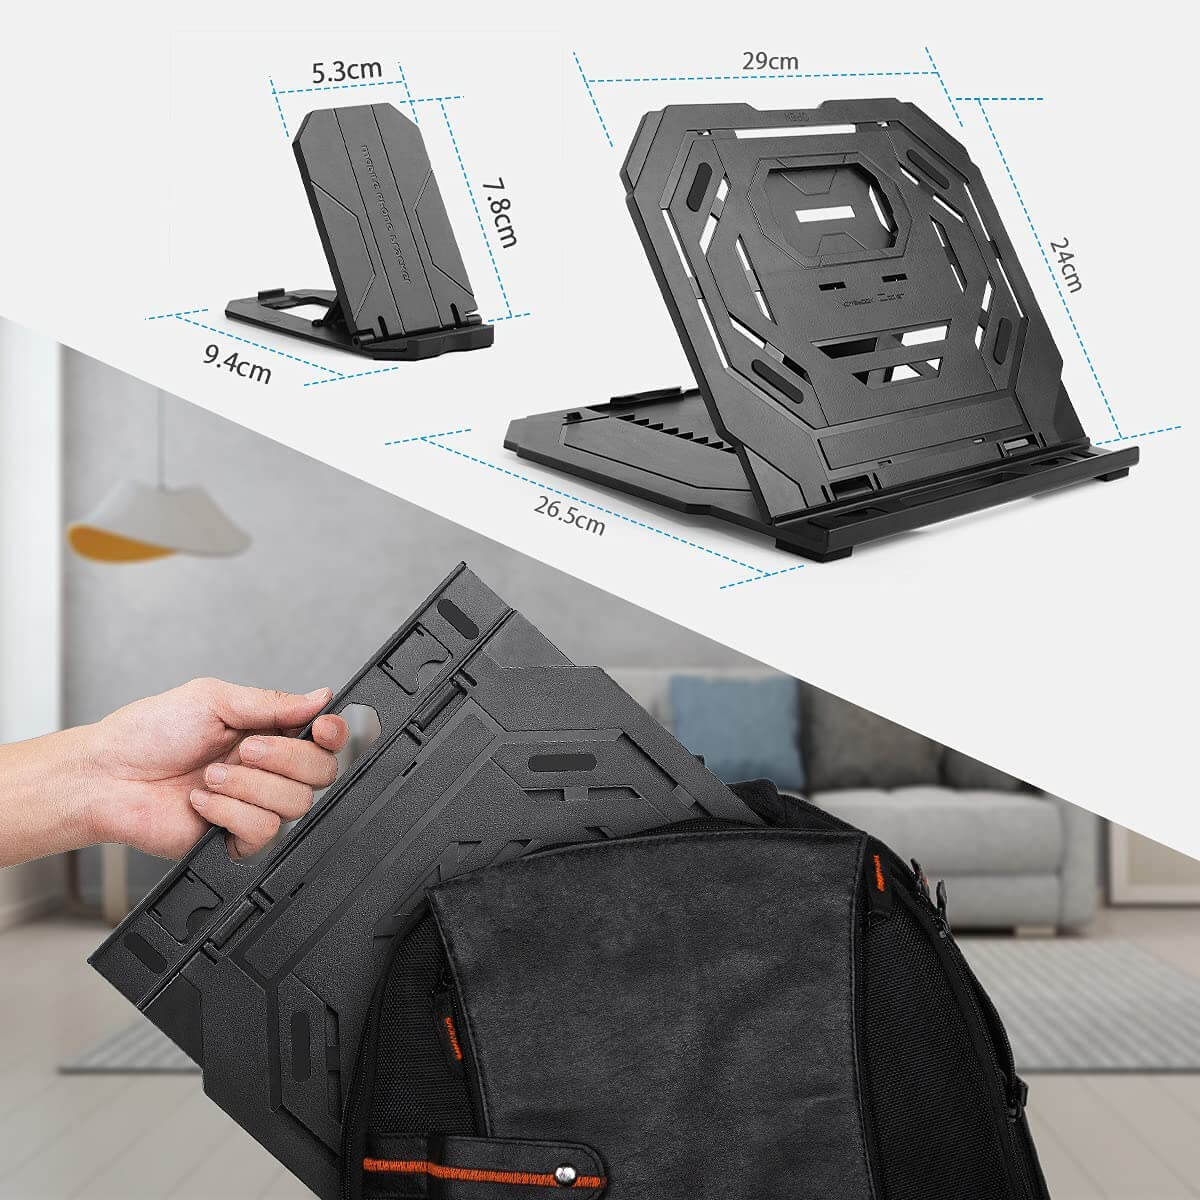 Frunsi graphics tablet stand can be folded and laid flat when not using it. It is lightweight and stylish, ideal for carrying around in a travel bag.